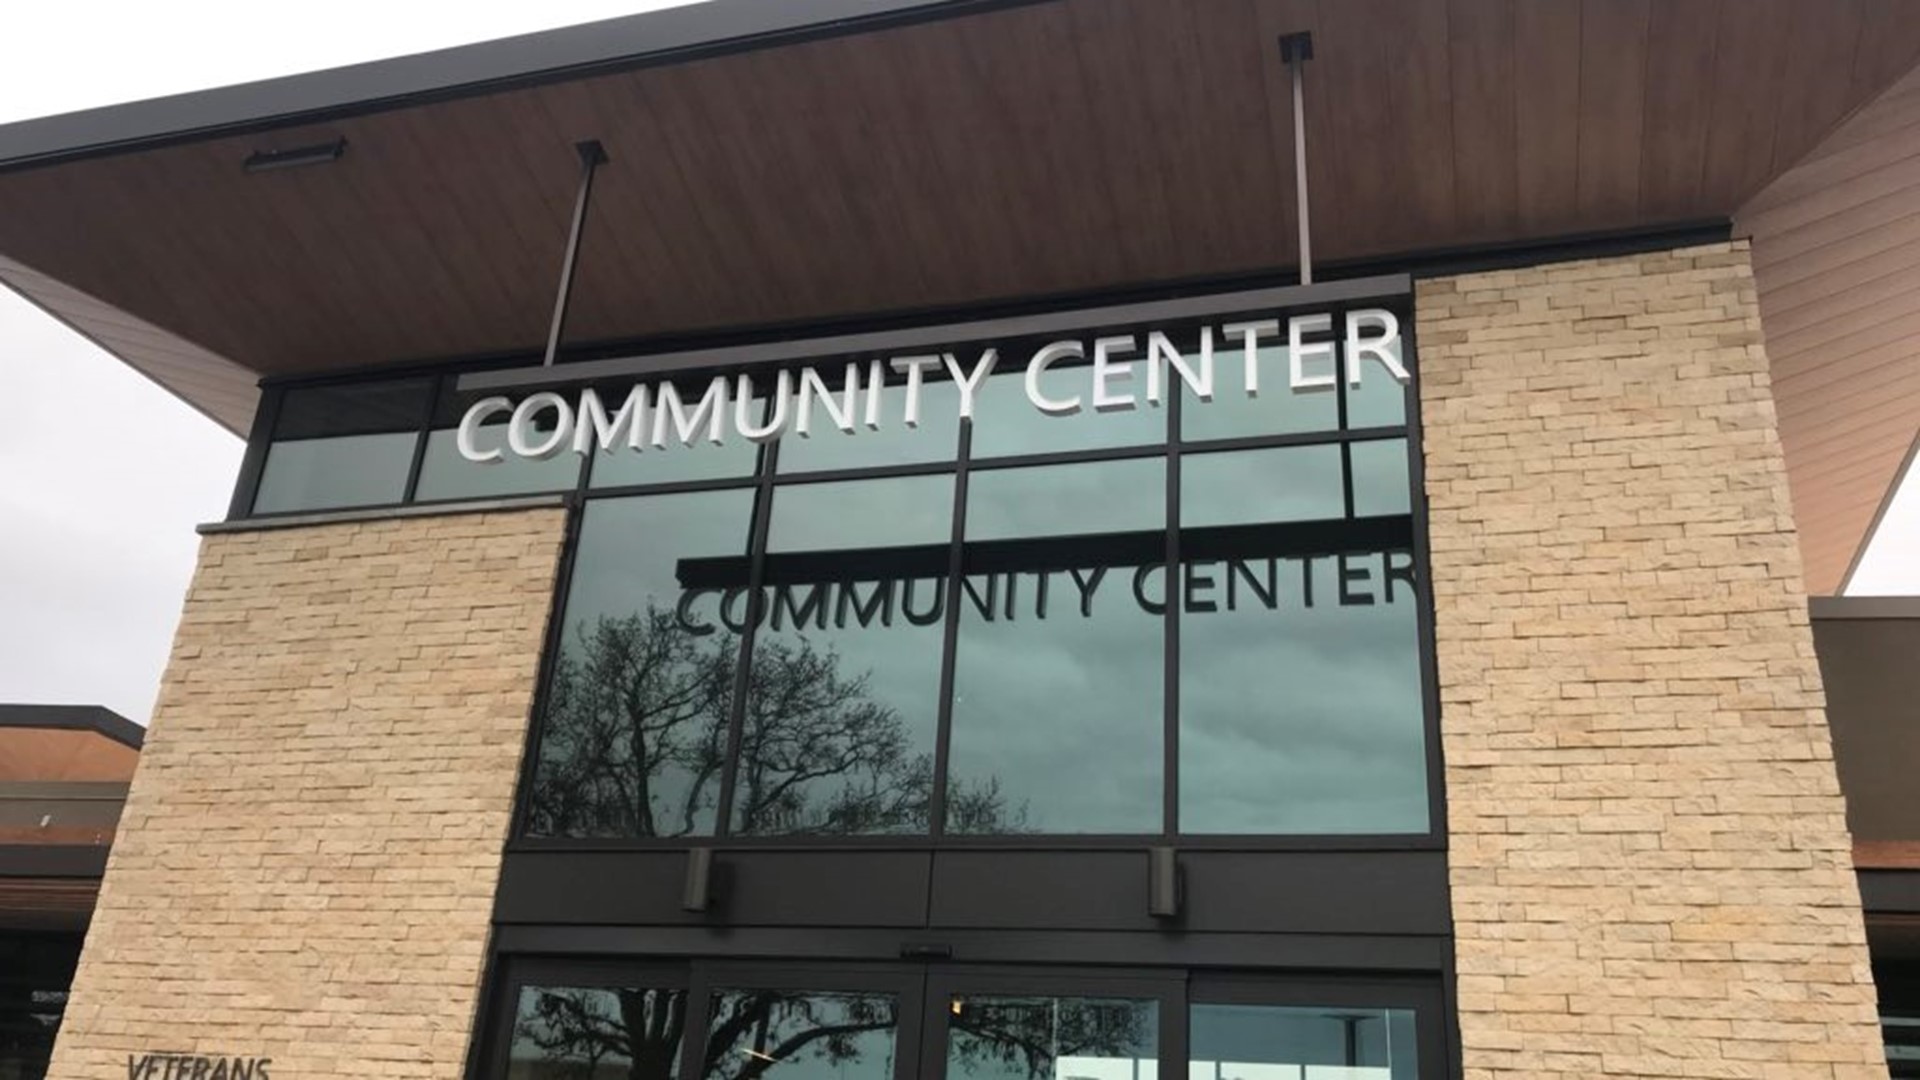 Decades in the making, Elk Grove prepares to open its first city-owned and operated community center that will rent out space for special events.